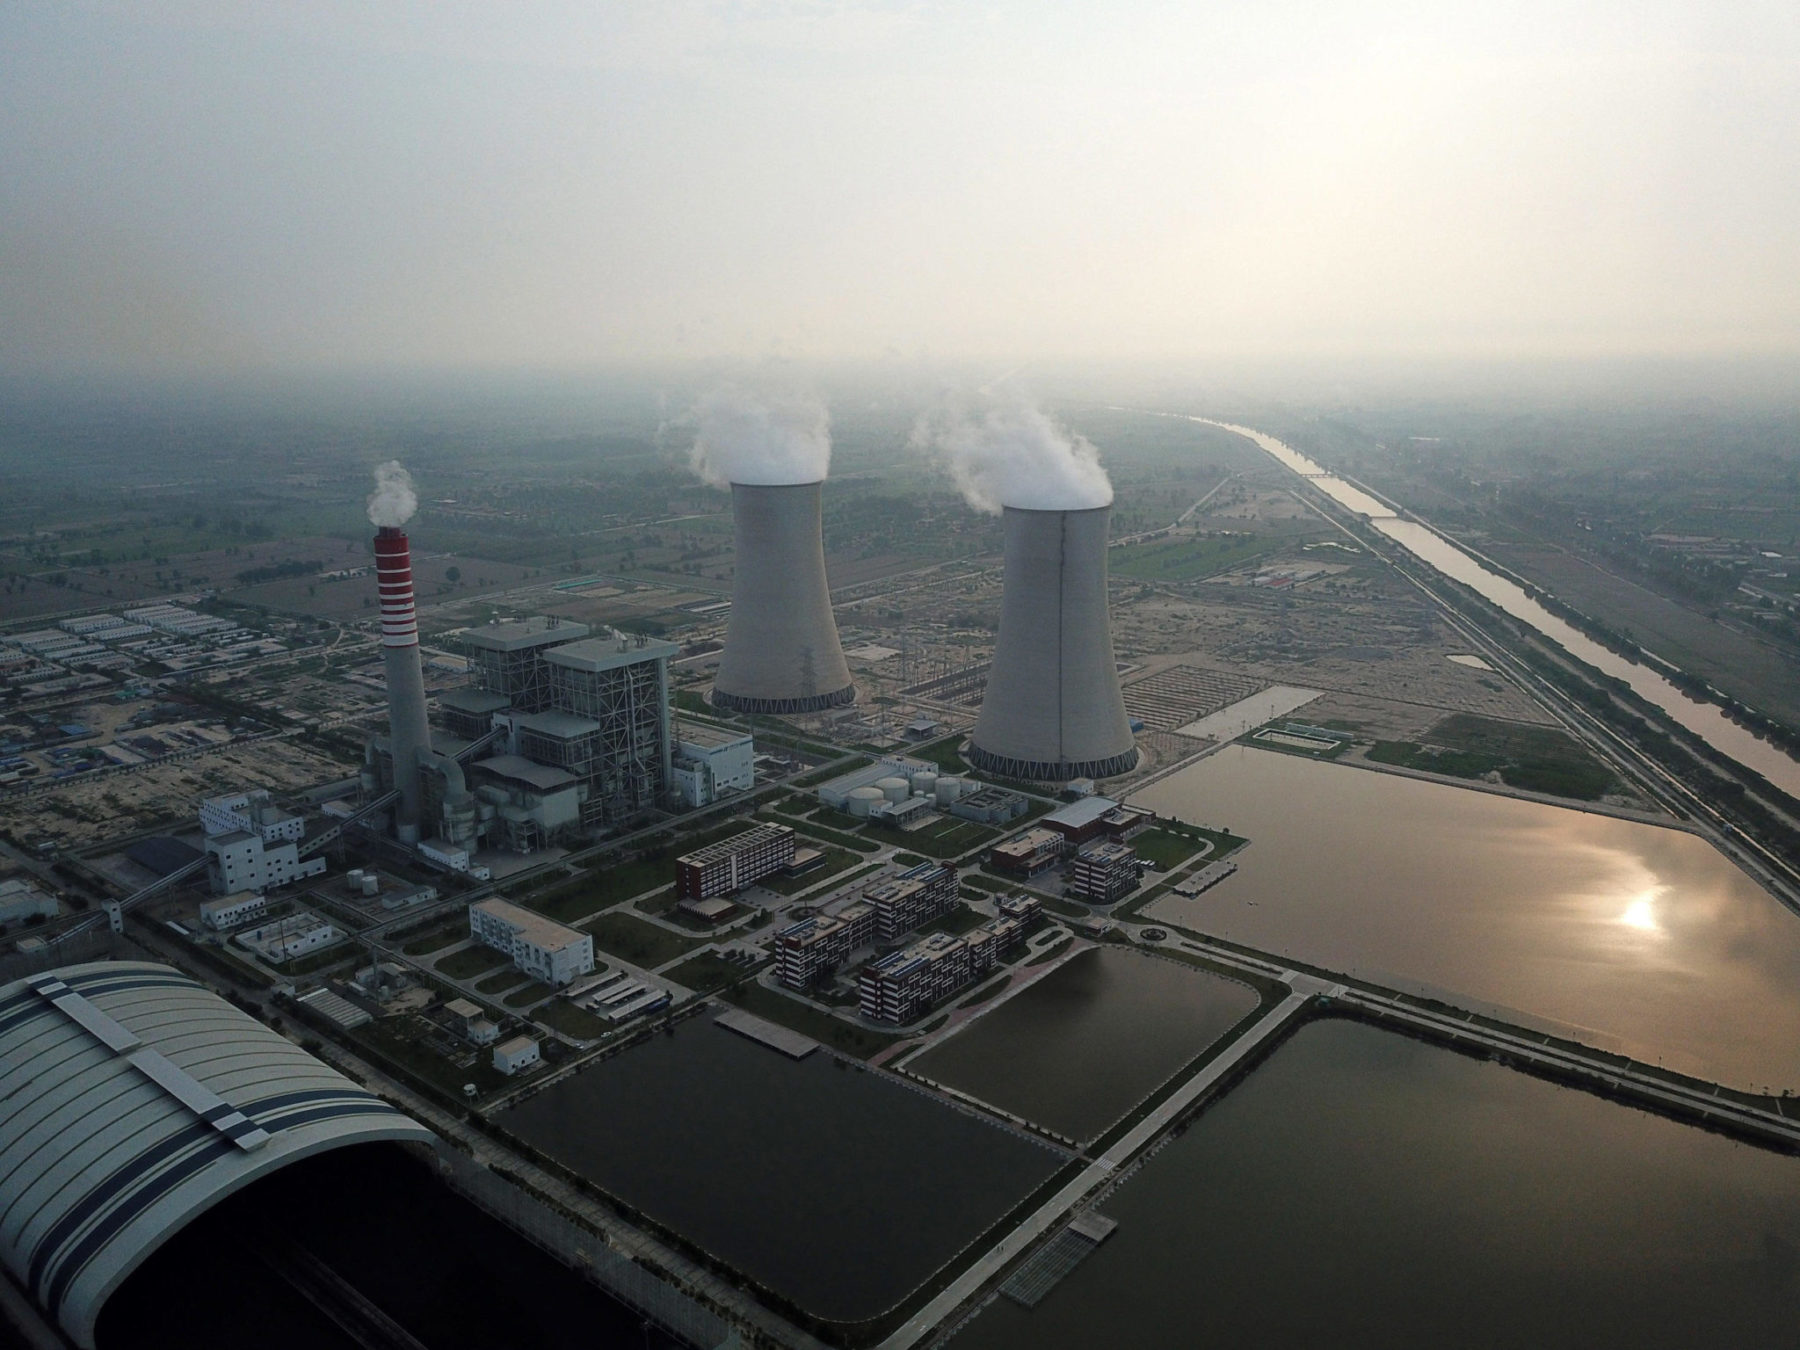 <p>A coal power plant in Sahiwal, Punjab. Six coal plants have been built under the China-Pakistan Economic Corridor so far, adding almost 5,000 MW of power to the grid by 2019 [Image by: Xinhua / Alamy]</p>